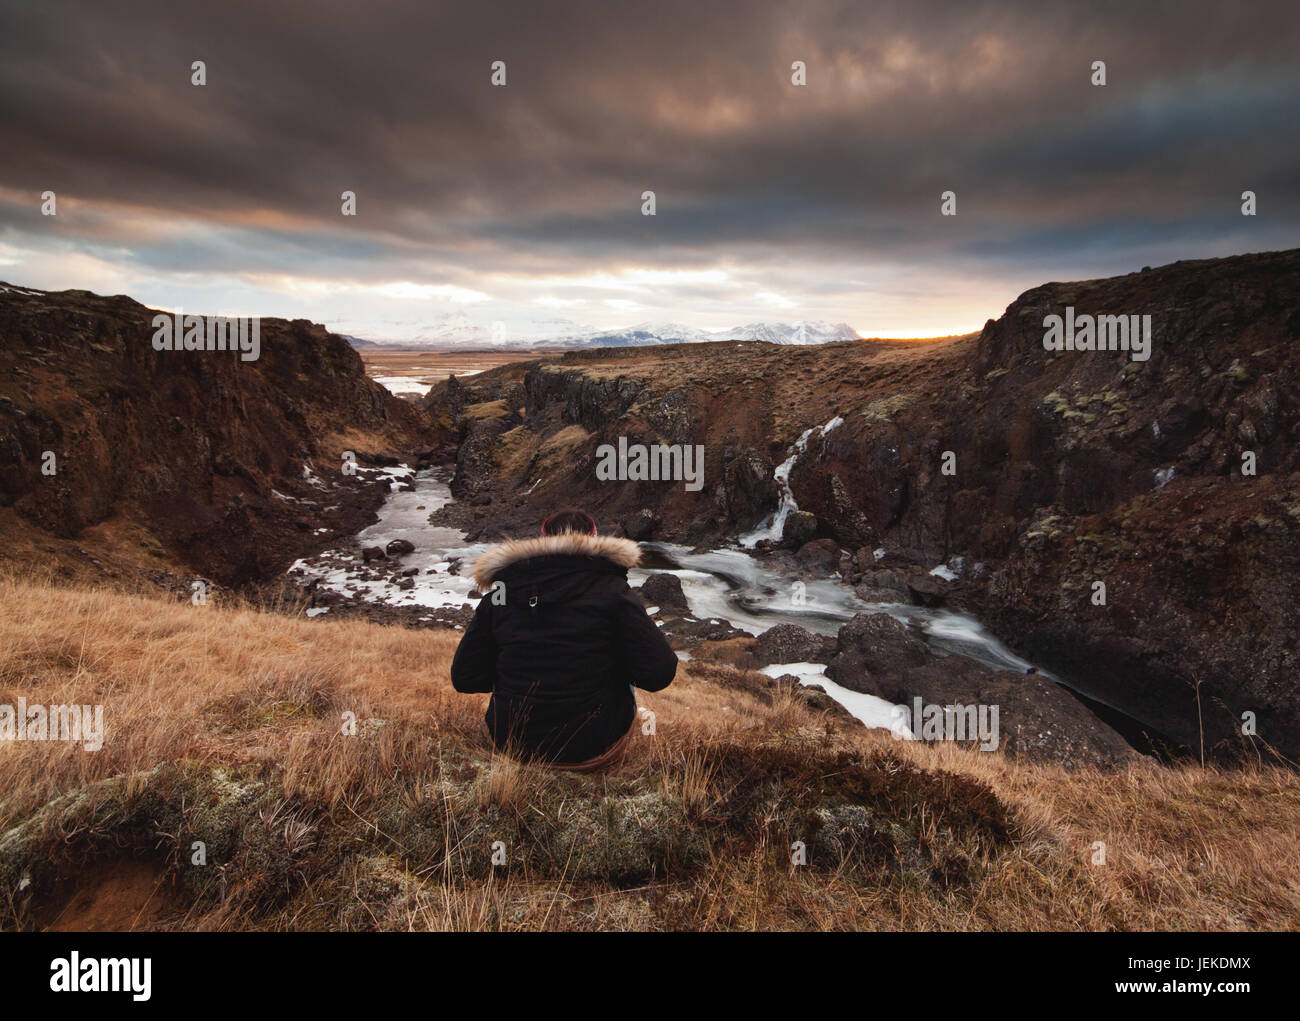 Woman sitting on rocks looking at sunset, Iceland Stock Photo